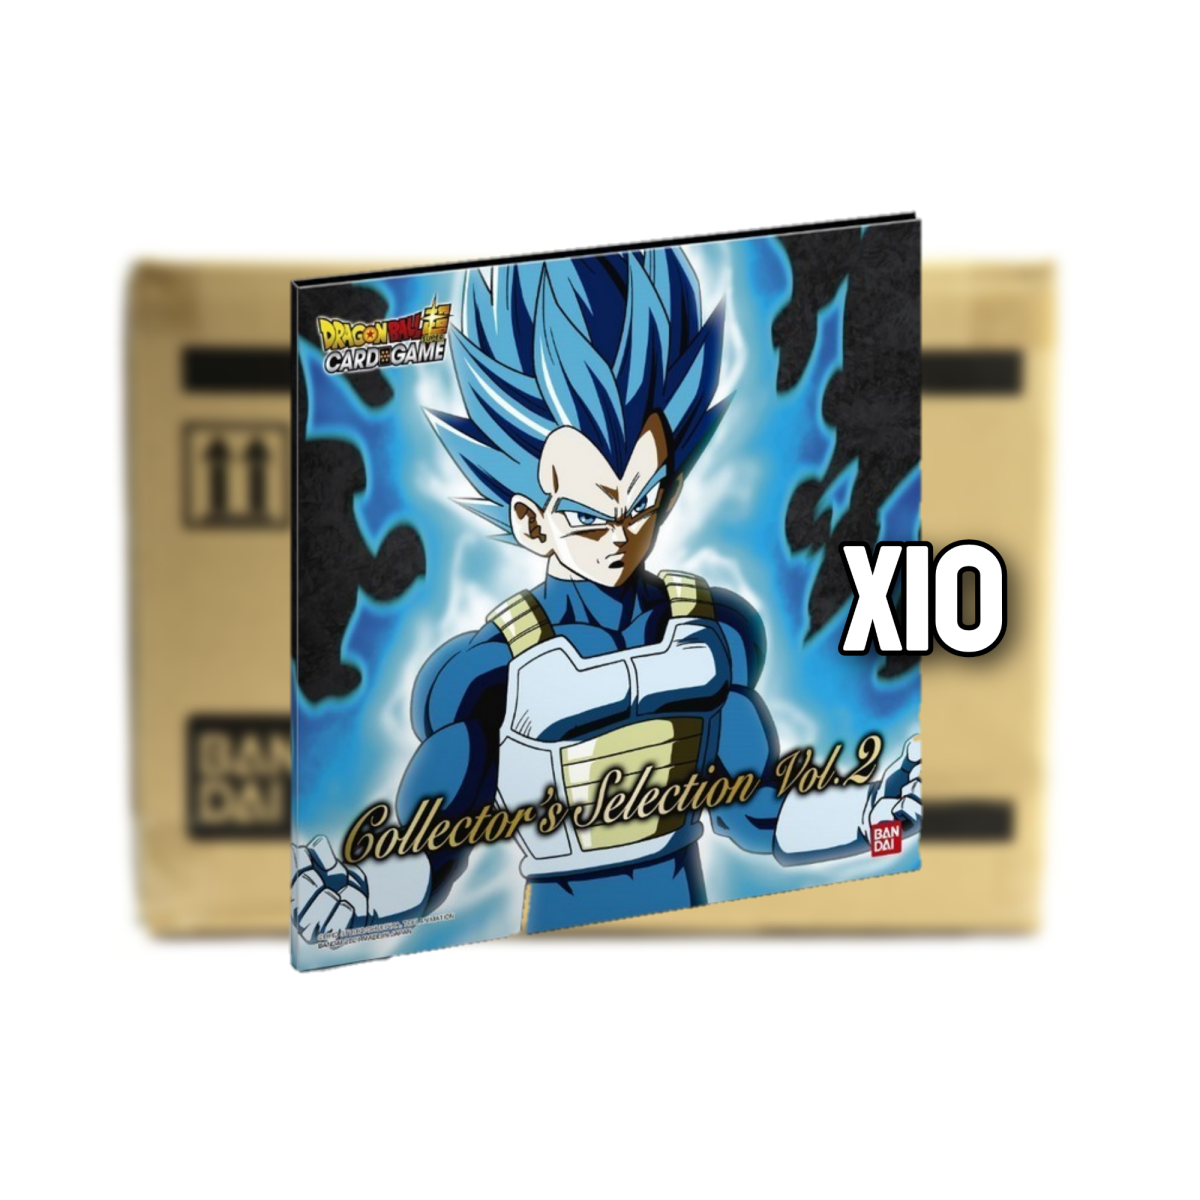 Dragon Ball TCG - Pack of 10 Premium Box - Collector's Selection Vol. 2 - IN